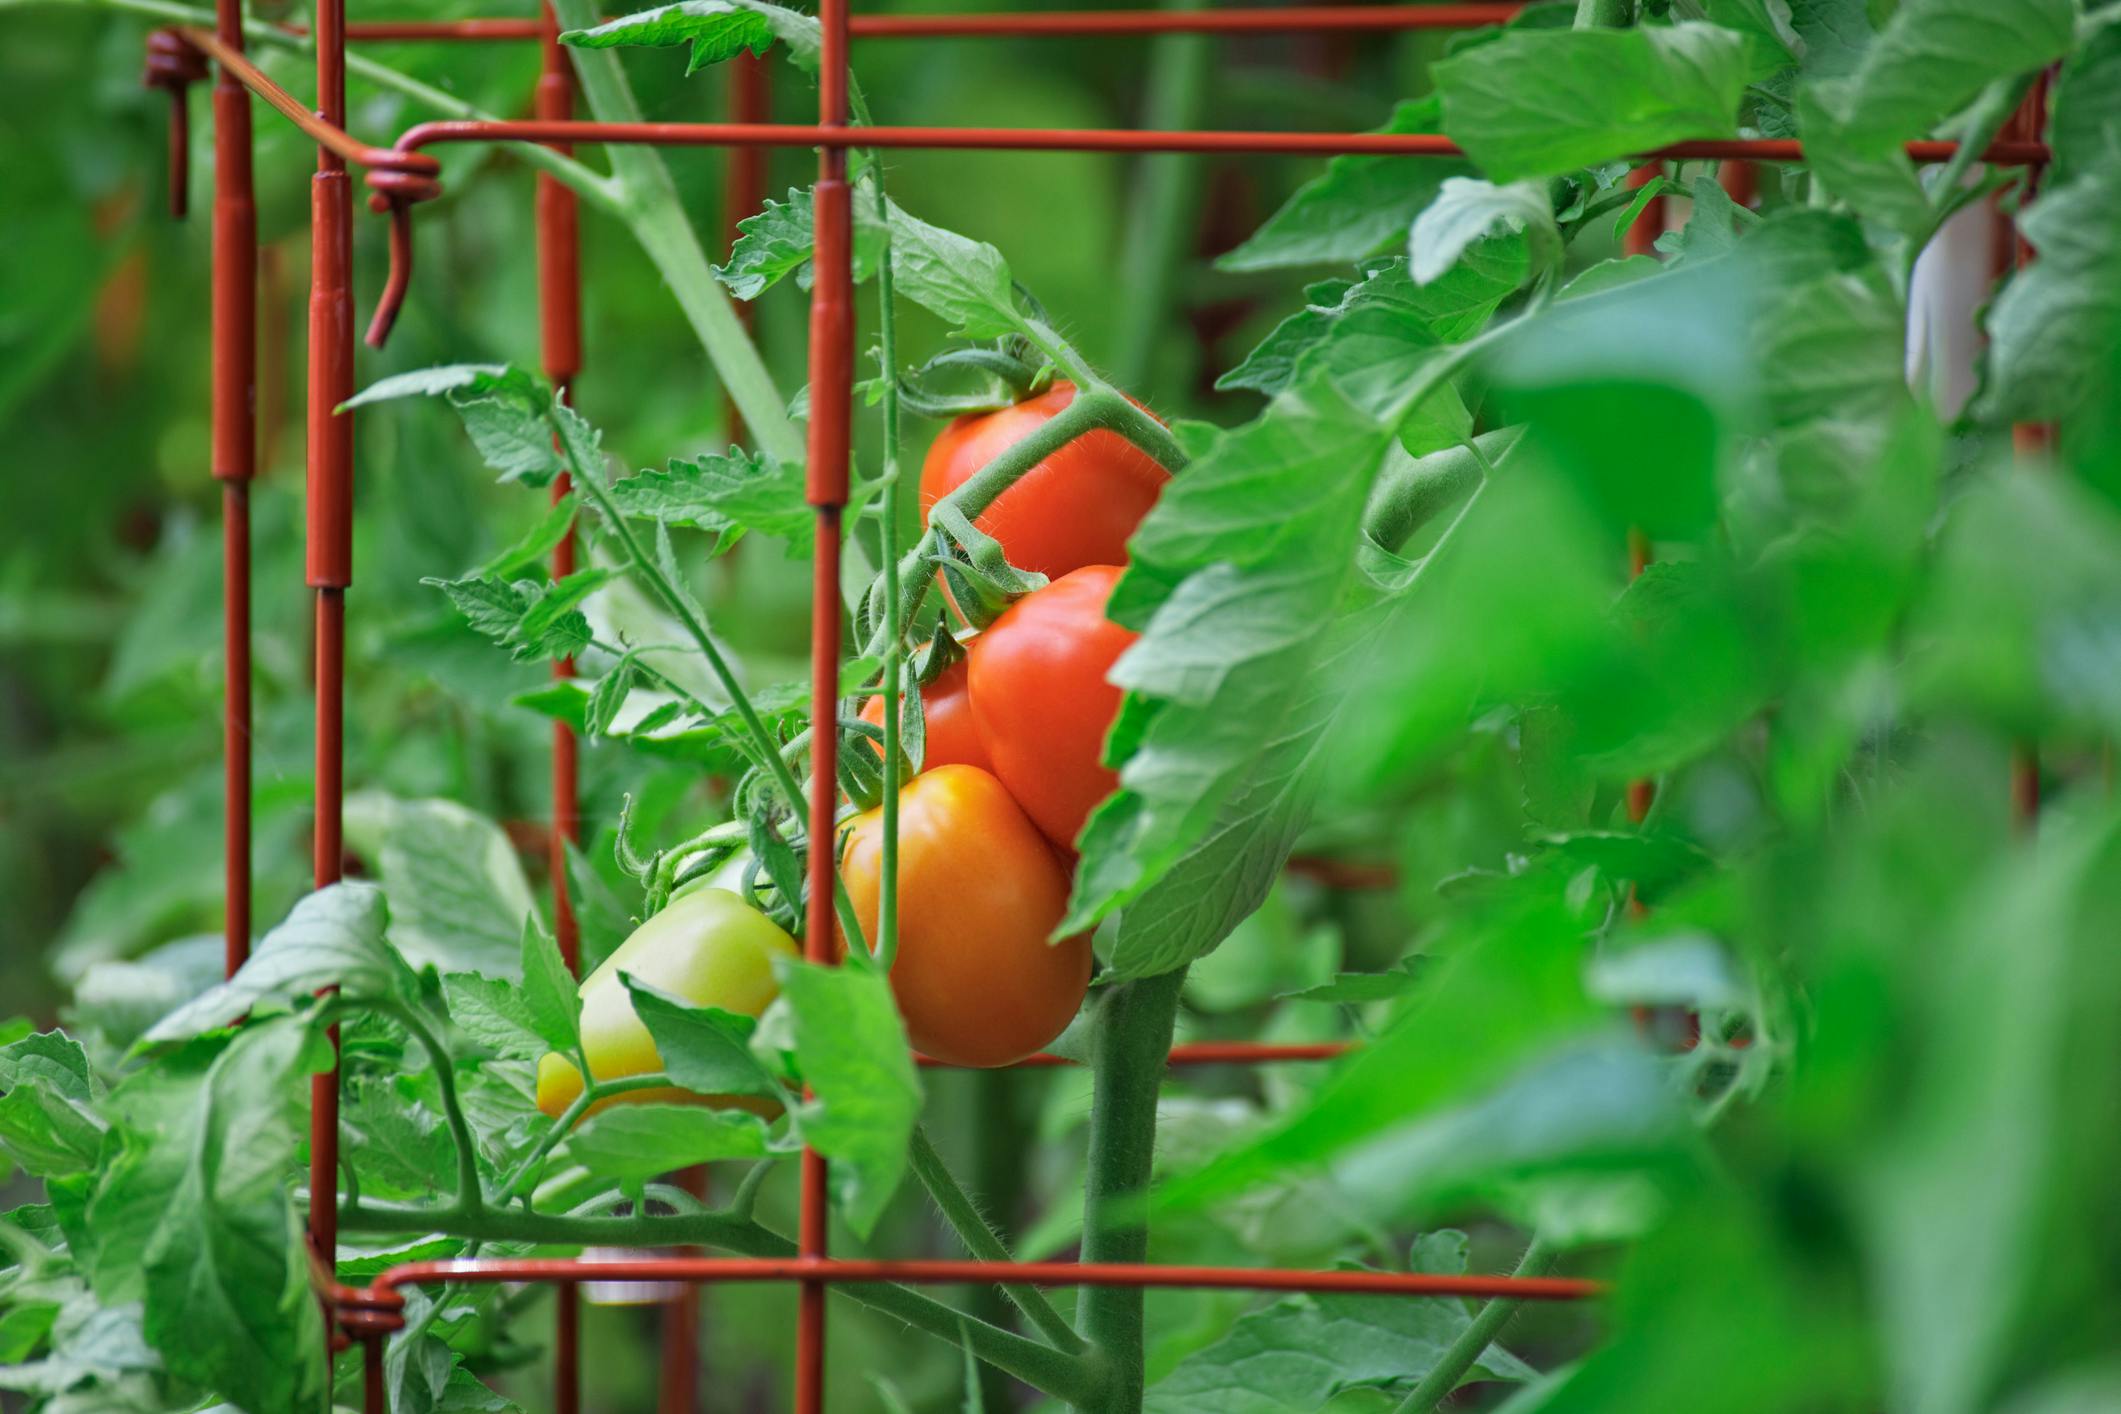 Tomatoes in tomato cages